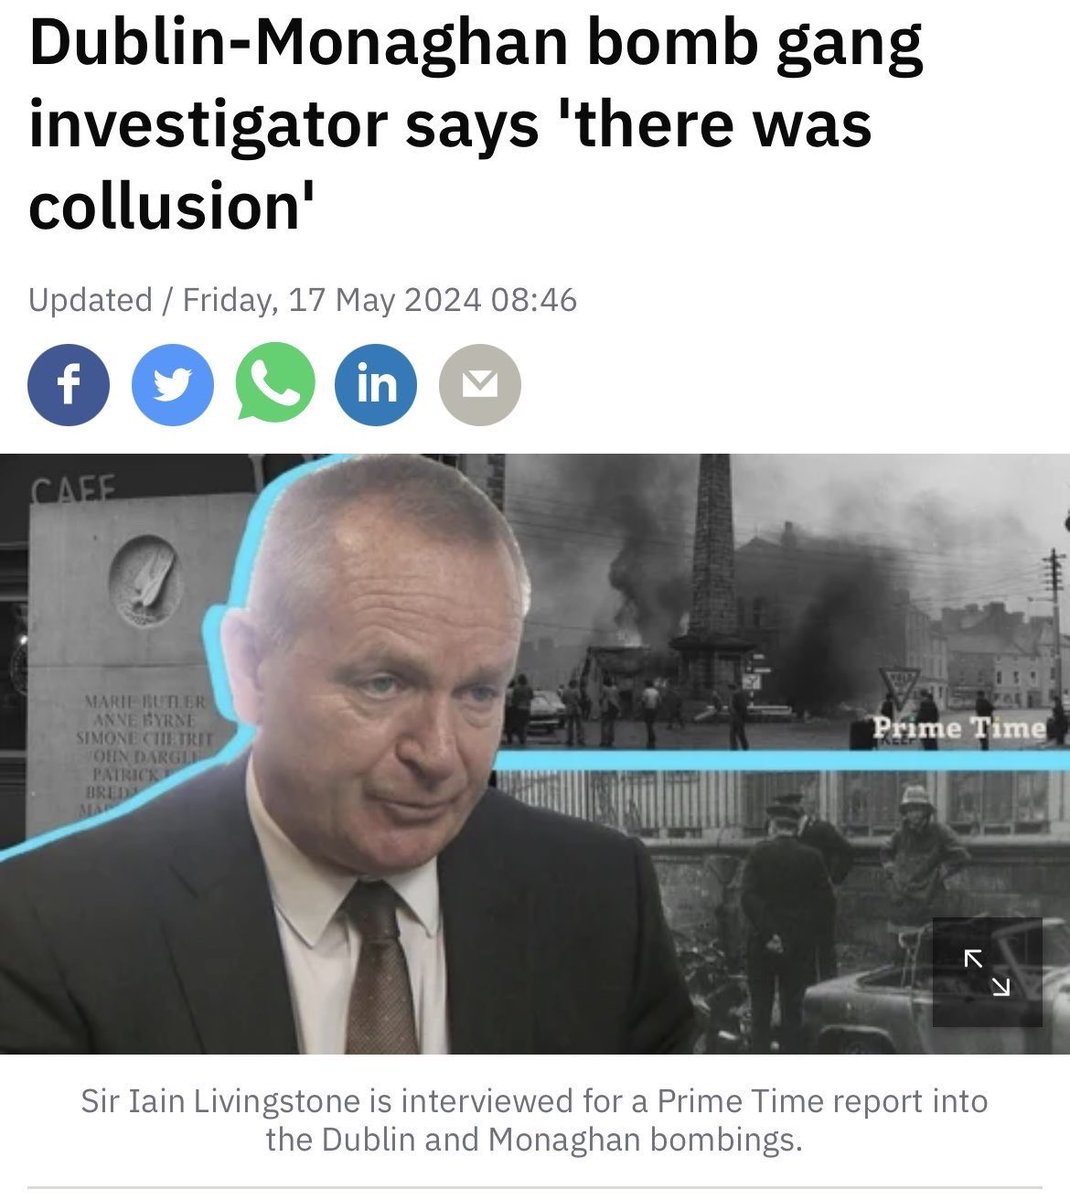 ~ 3 years ago Fine Gael ex-justice minister Charlie Flanagan rubbished claims that the British State colluded with Loyalists. Today, the lead investigator into the Glenanne Gang, Iain Livingston, says there was collusion. Who was Charlie trying to protect and who does he serve?